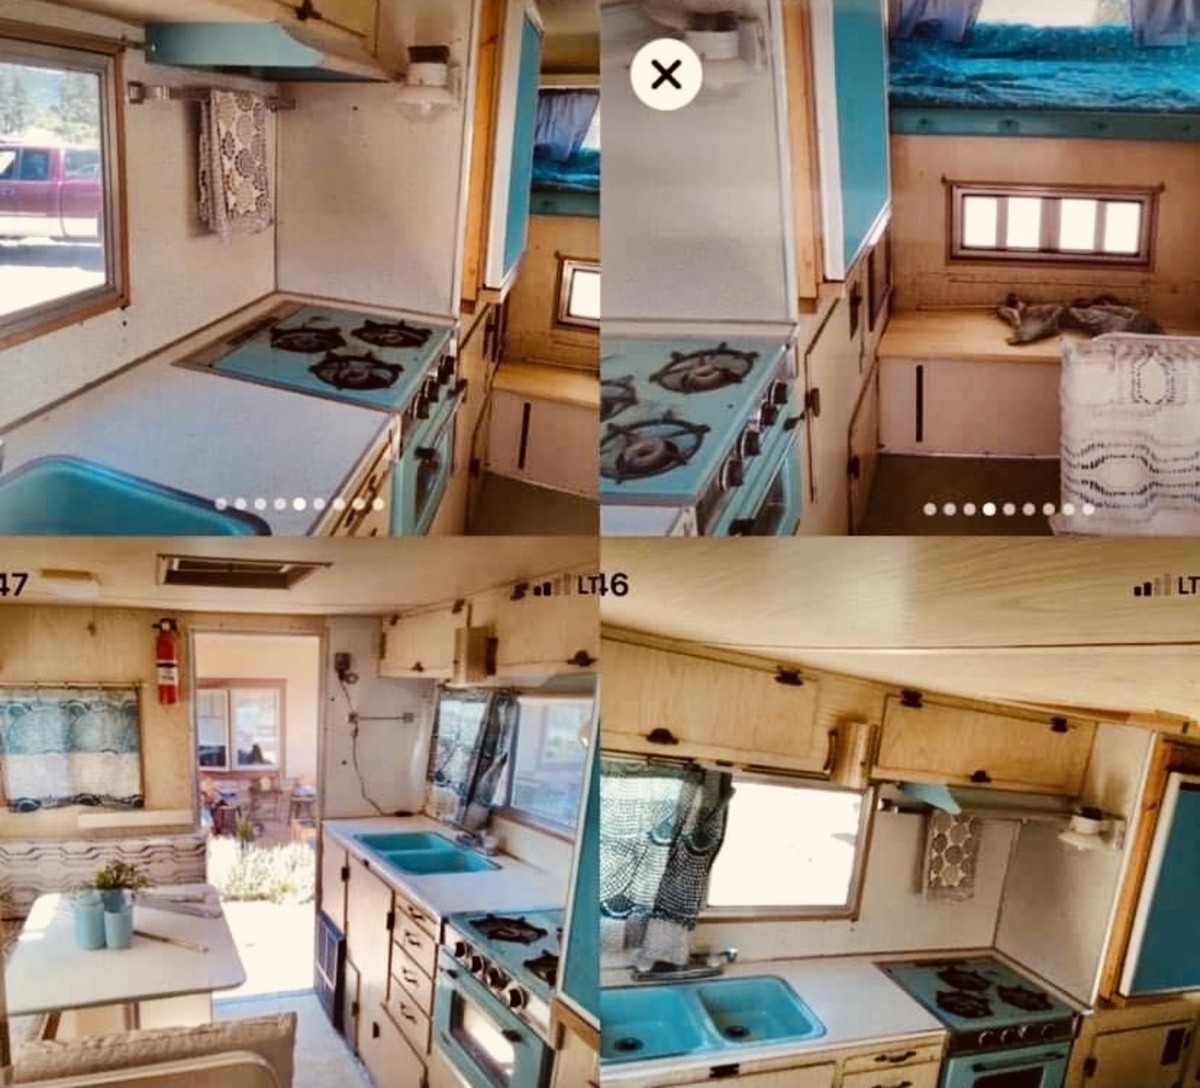 The 1979 truck camper interior that inspired me